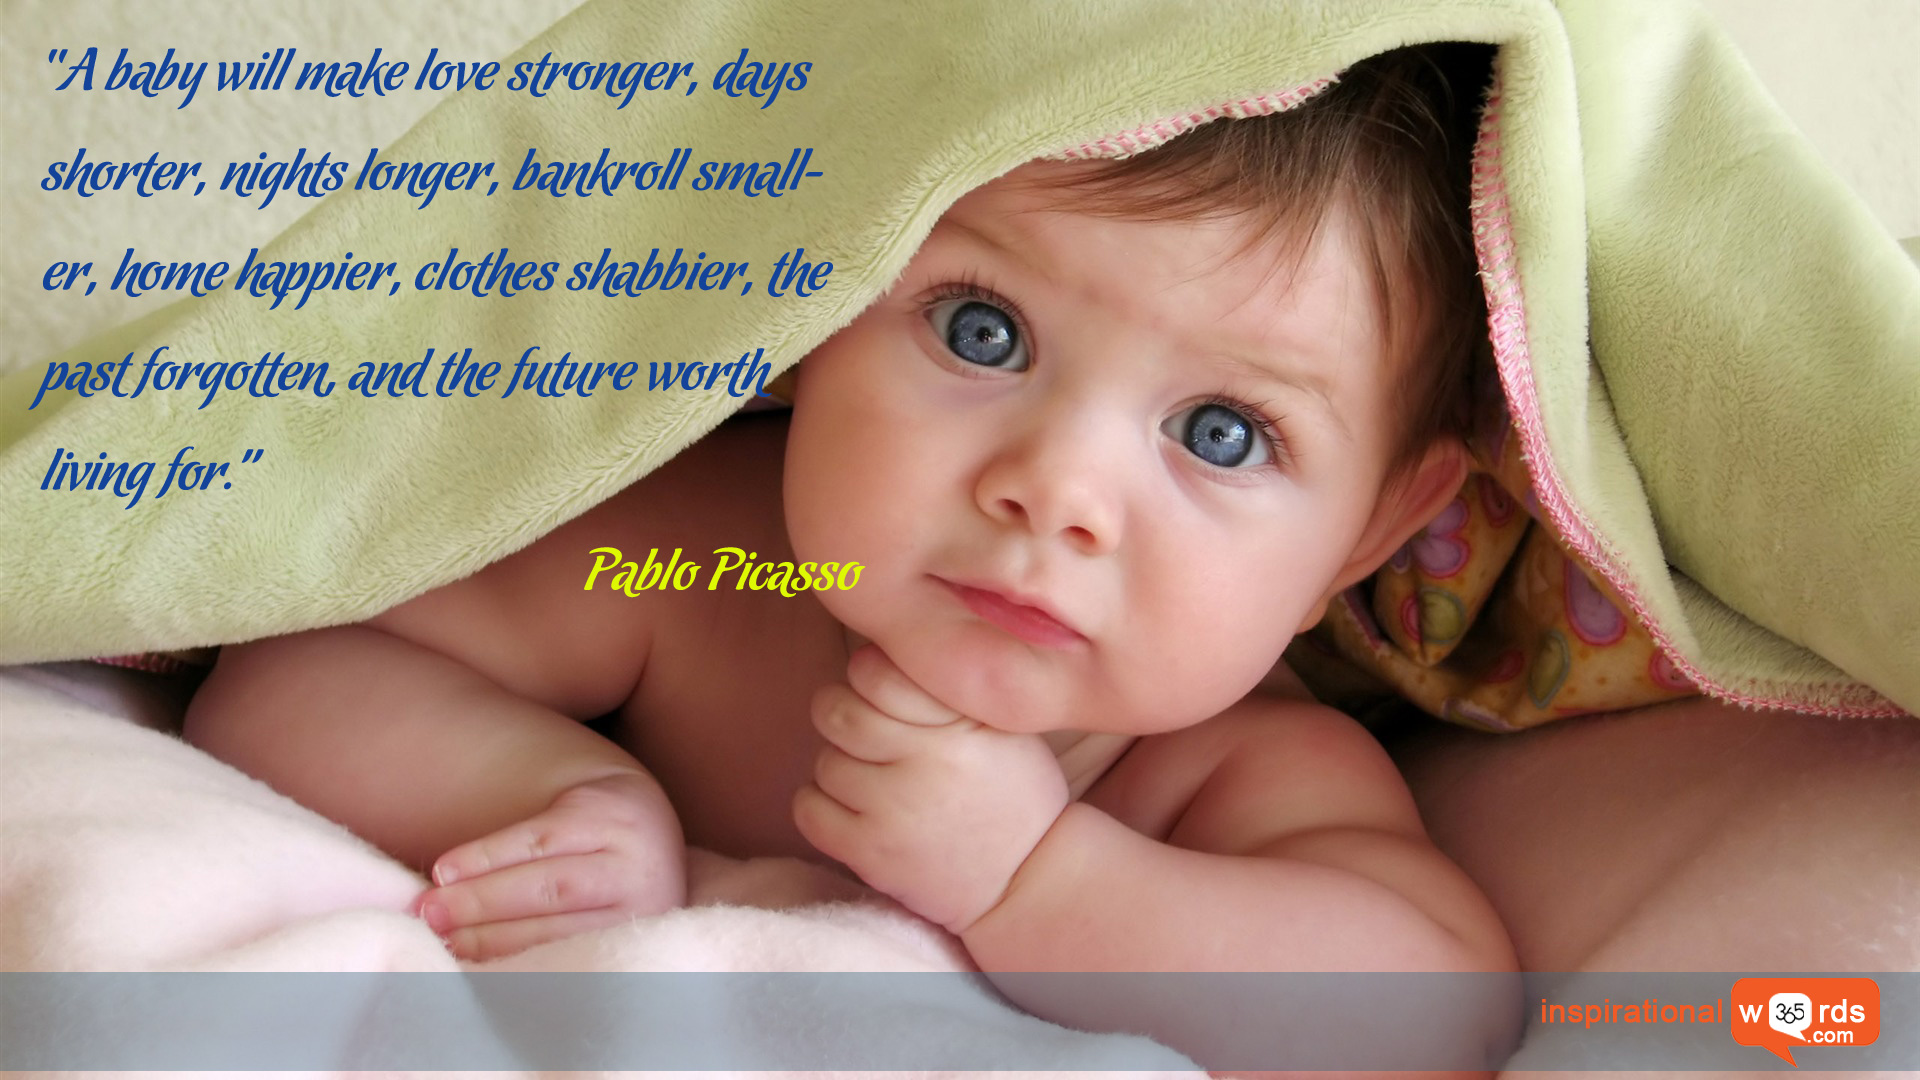 Inspirational Wallpaper Quote By Pablo Picasso - Best Babies , HD Wallpaper & Backgrounds